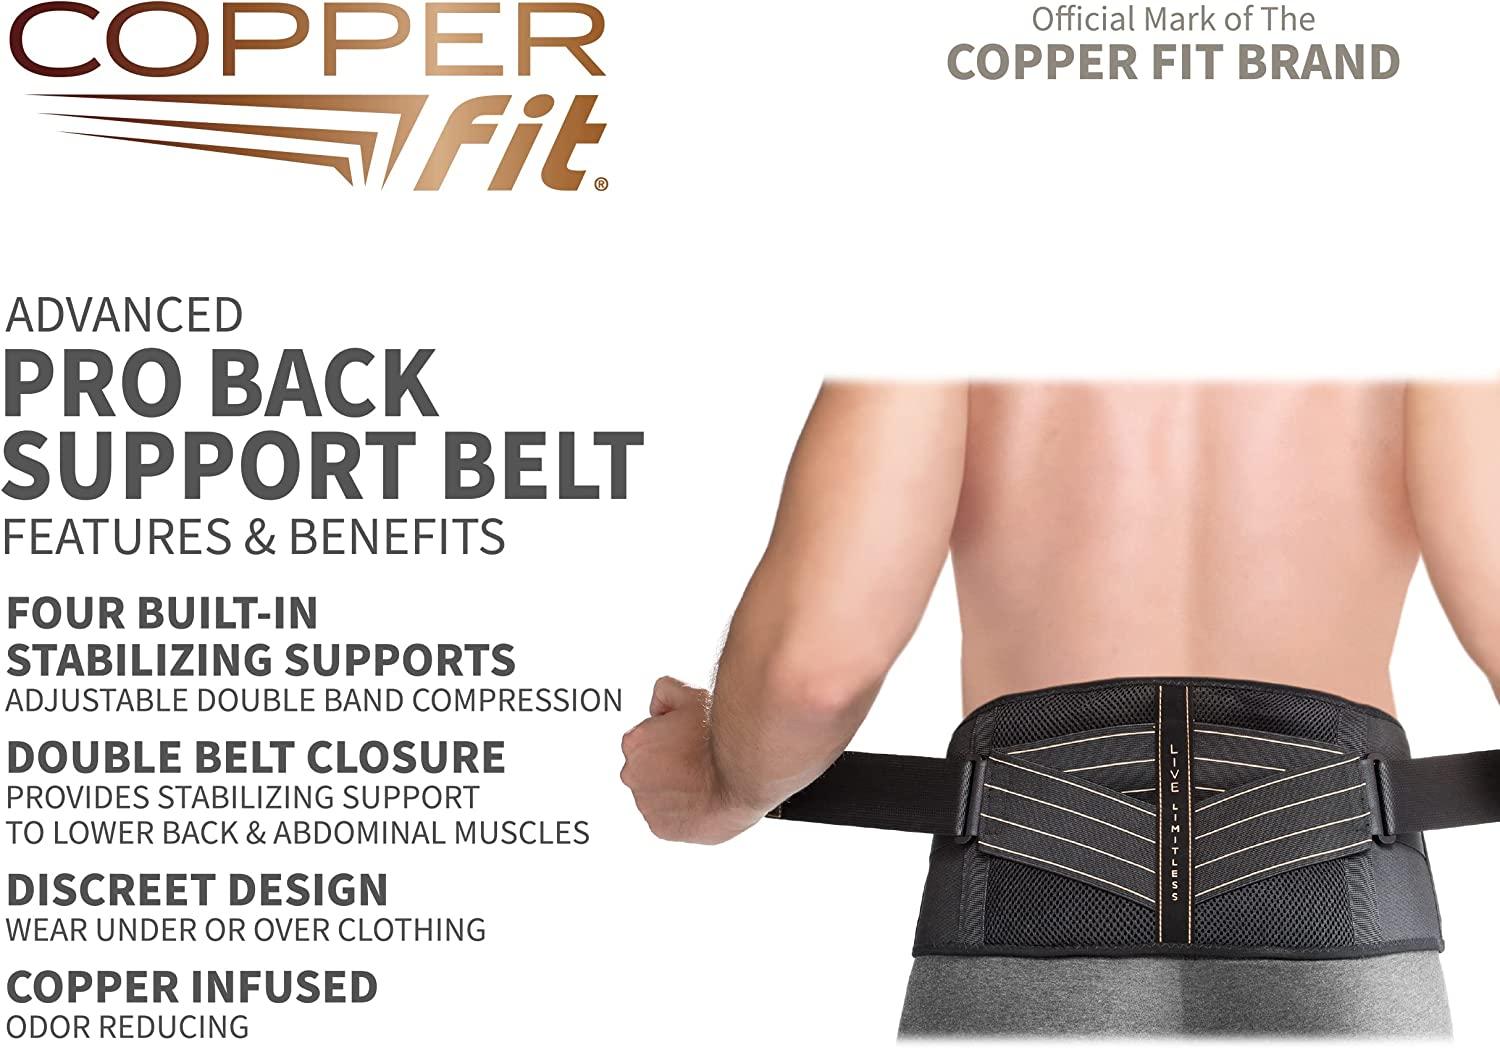  Copper Fit Back Support, Size 39-50 : Health & Household